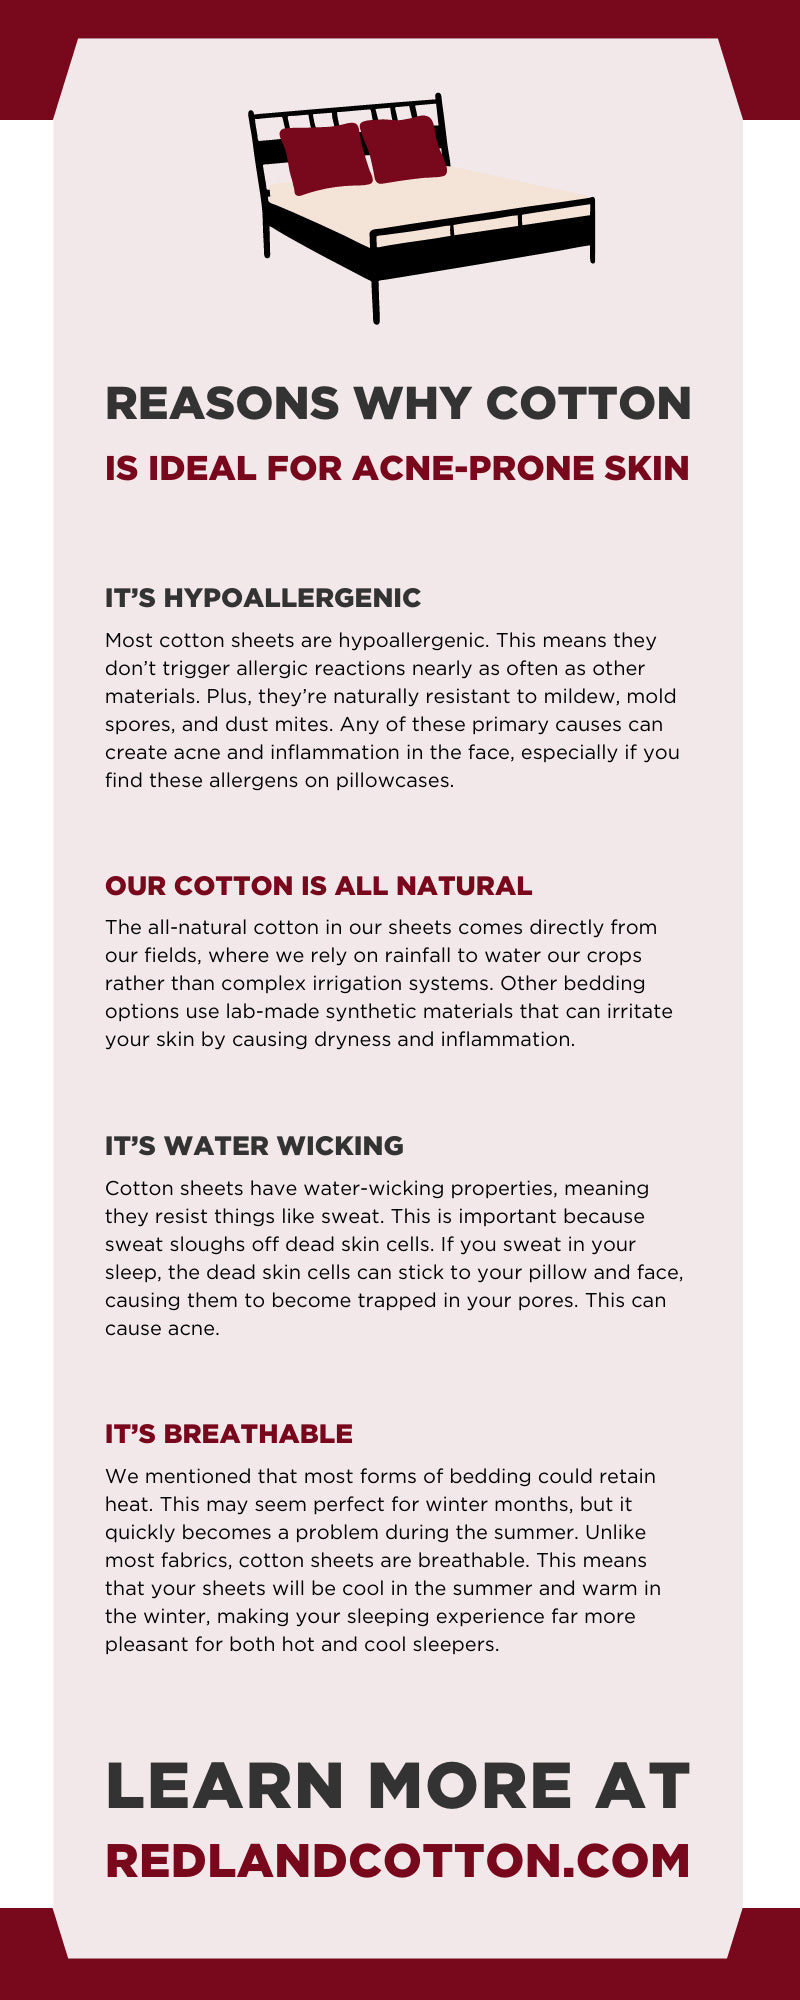 Reasons Why Cotton Is Ideal for Acne-Prone Skin